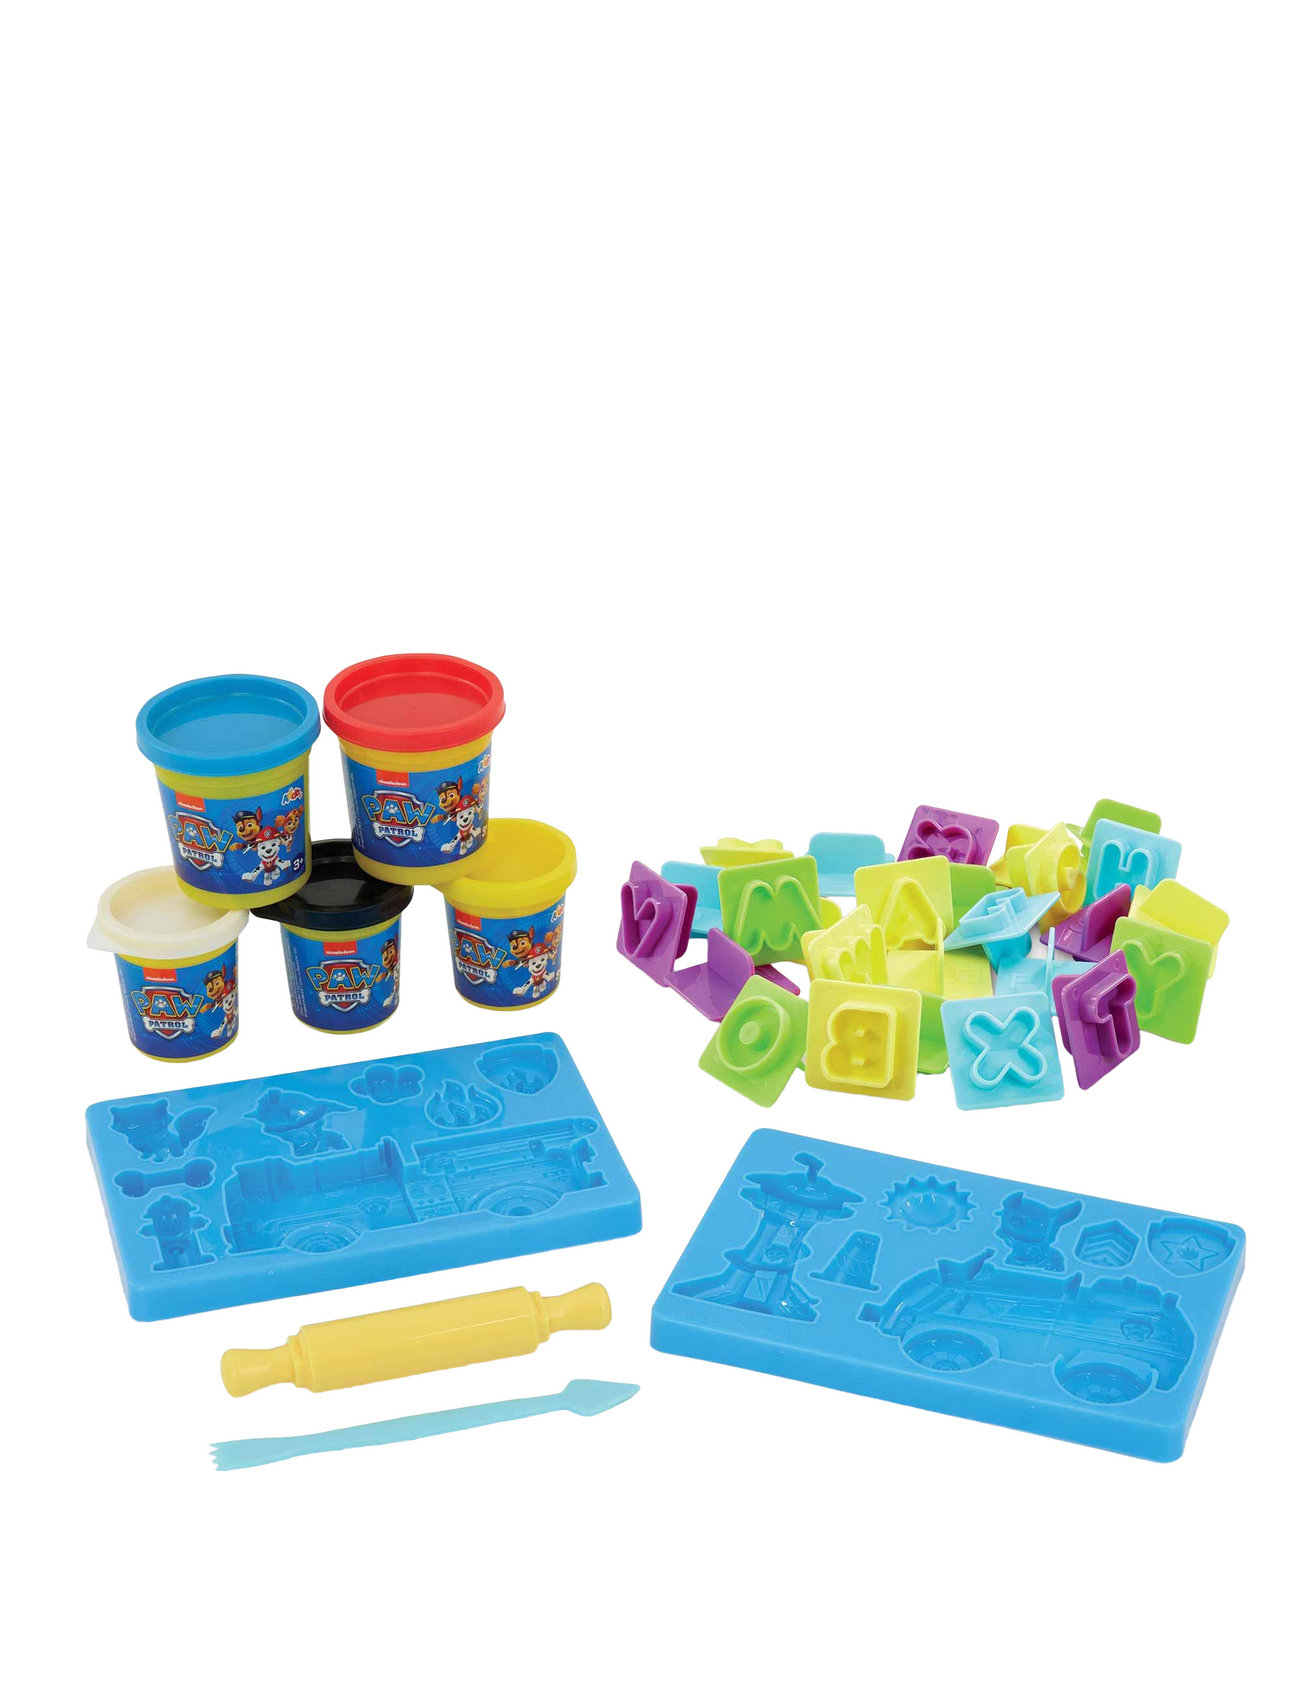 Chase & Marshall's Adventure Playset Toys Creativity Drawing & Crafts Craft Play Dough Multi/patterned Paw Patrol